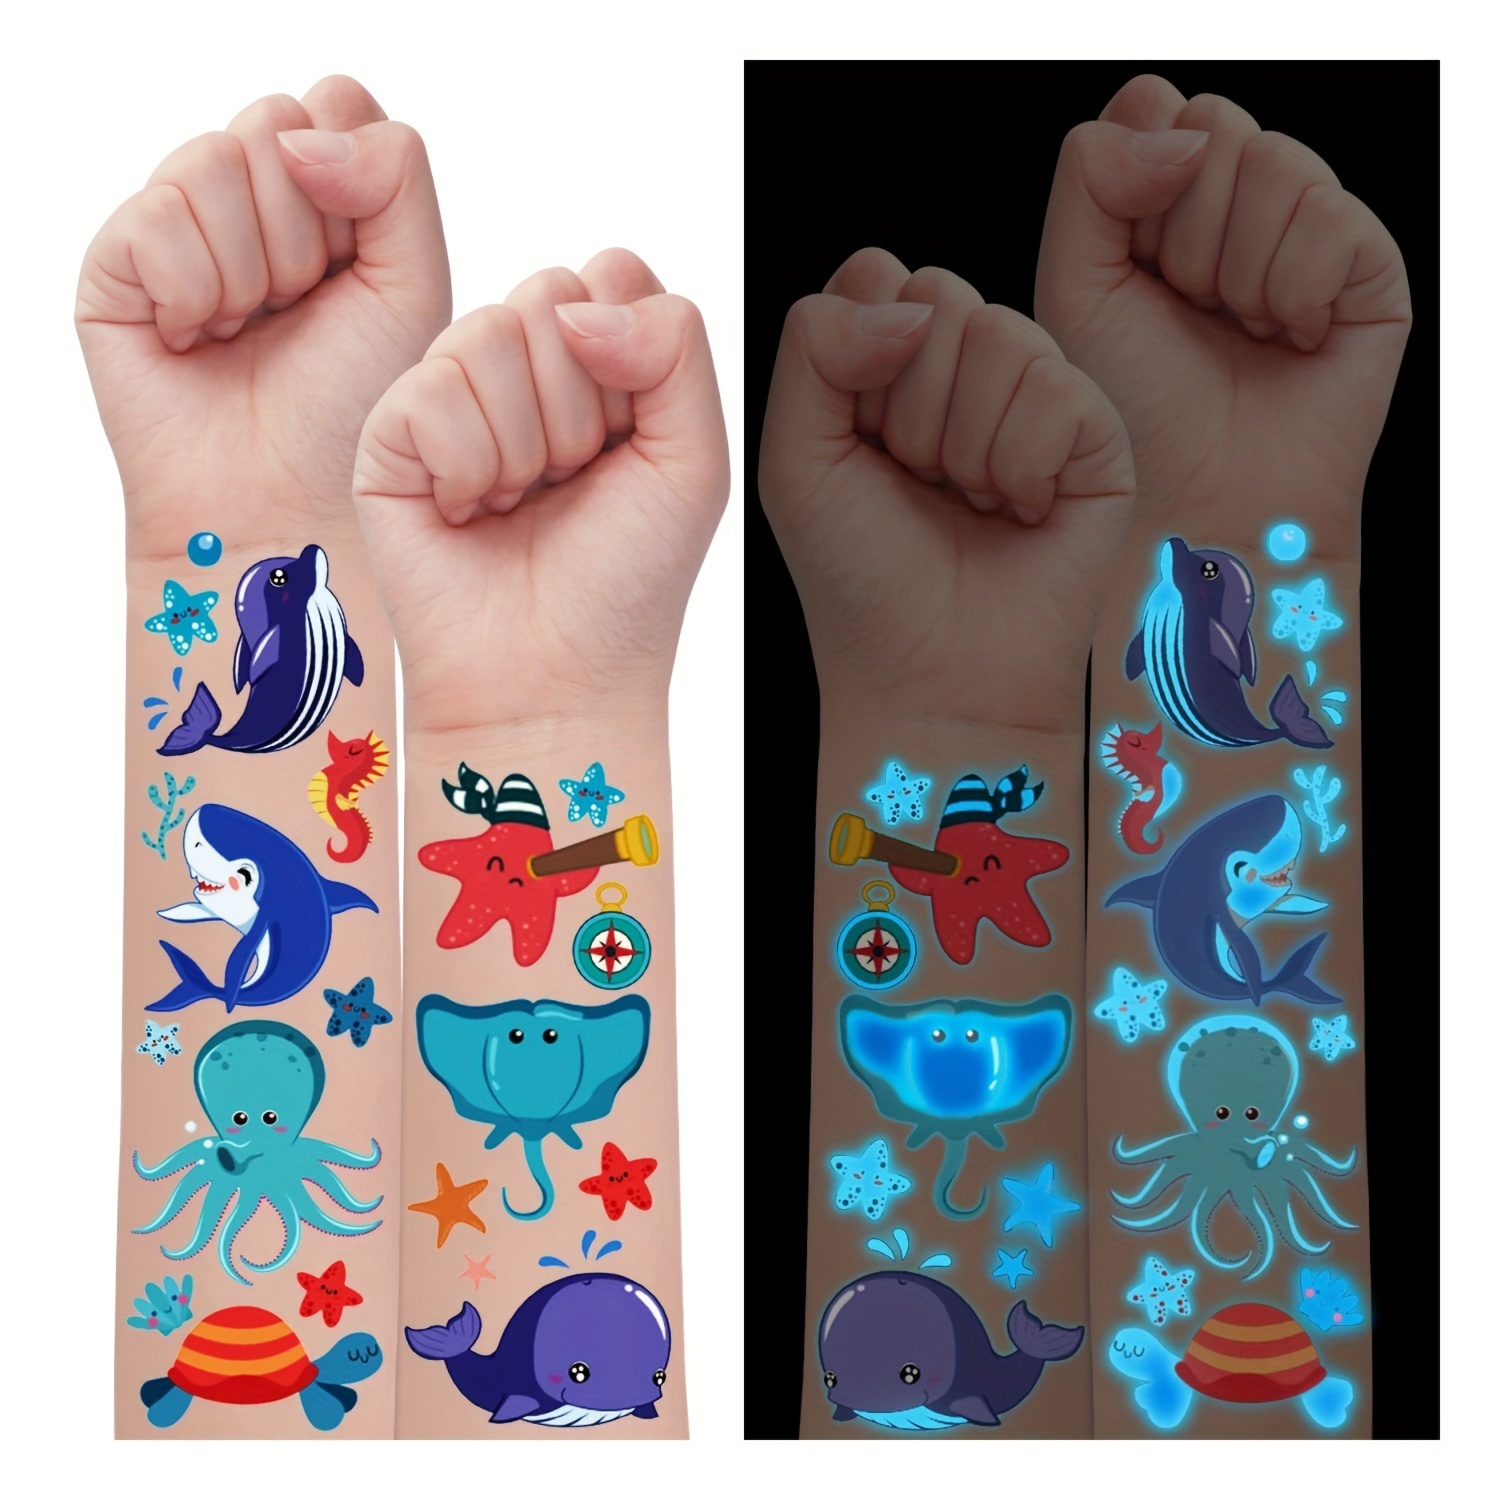 

170 Styles (12 Sheets) Luminous Blue Under Sea Temporary Tattoos Glow Ocean Beach Pool Birthday Party Decorations Supplies Favors, Fake Tattoo Stickers For Gifts